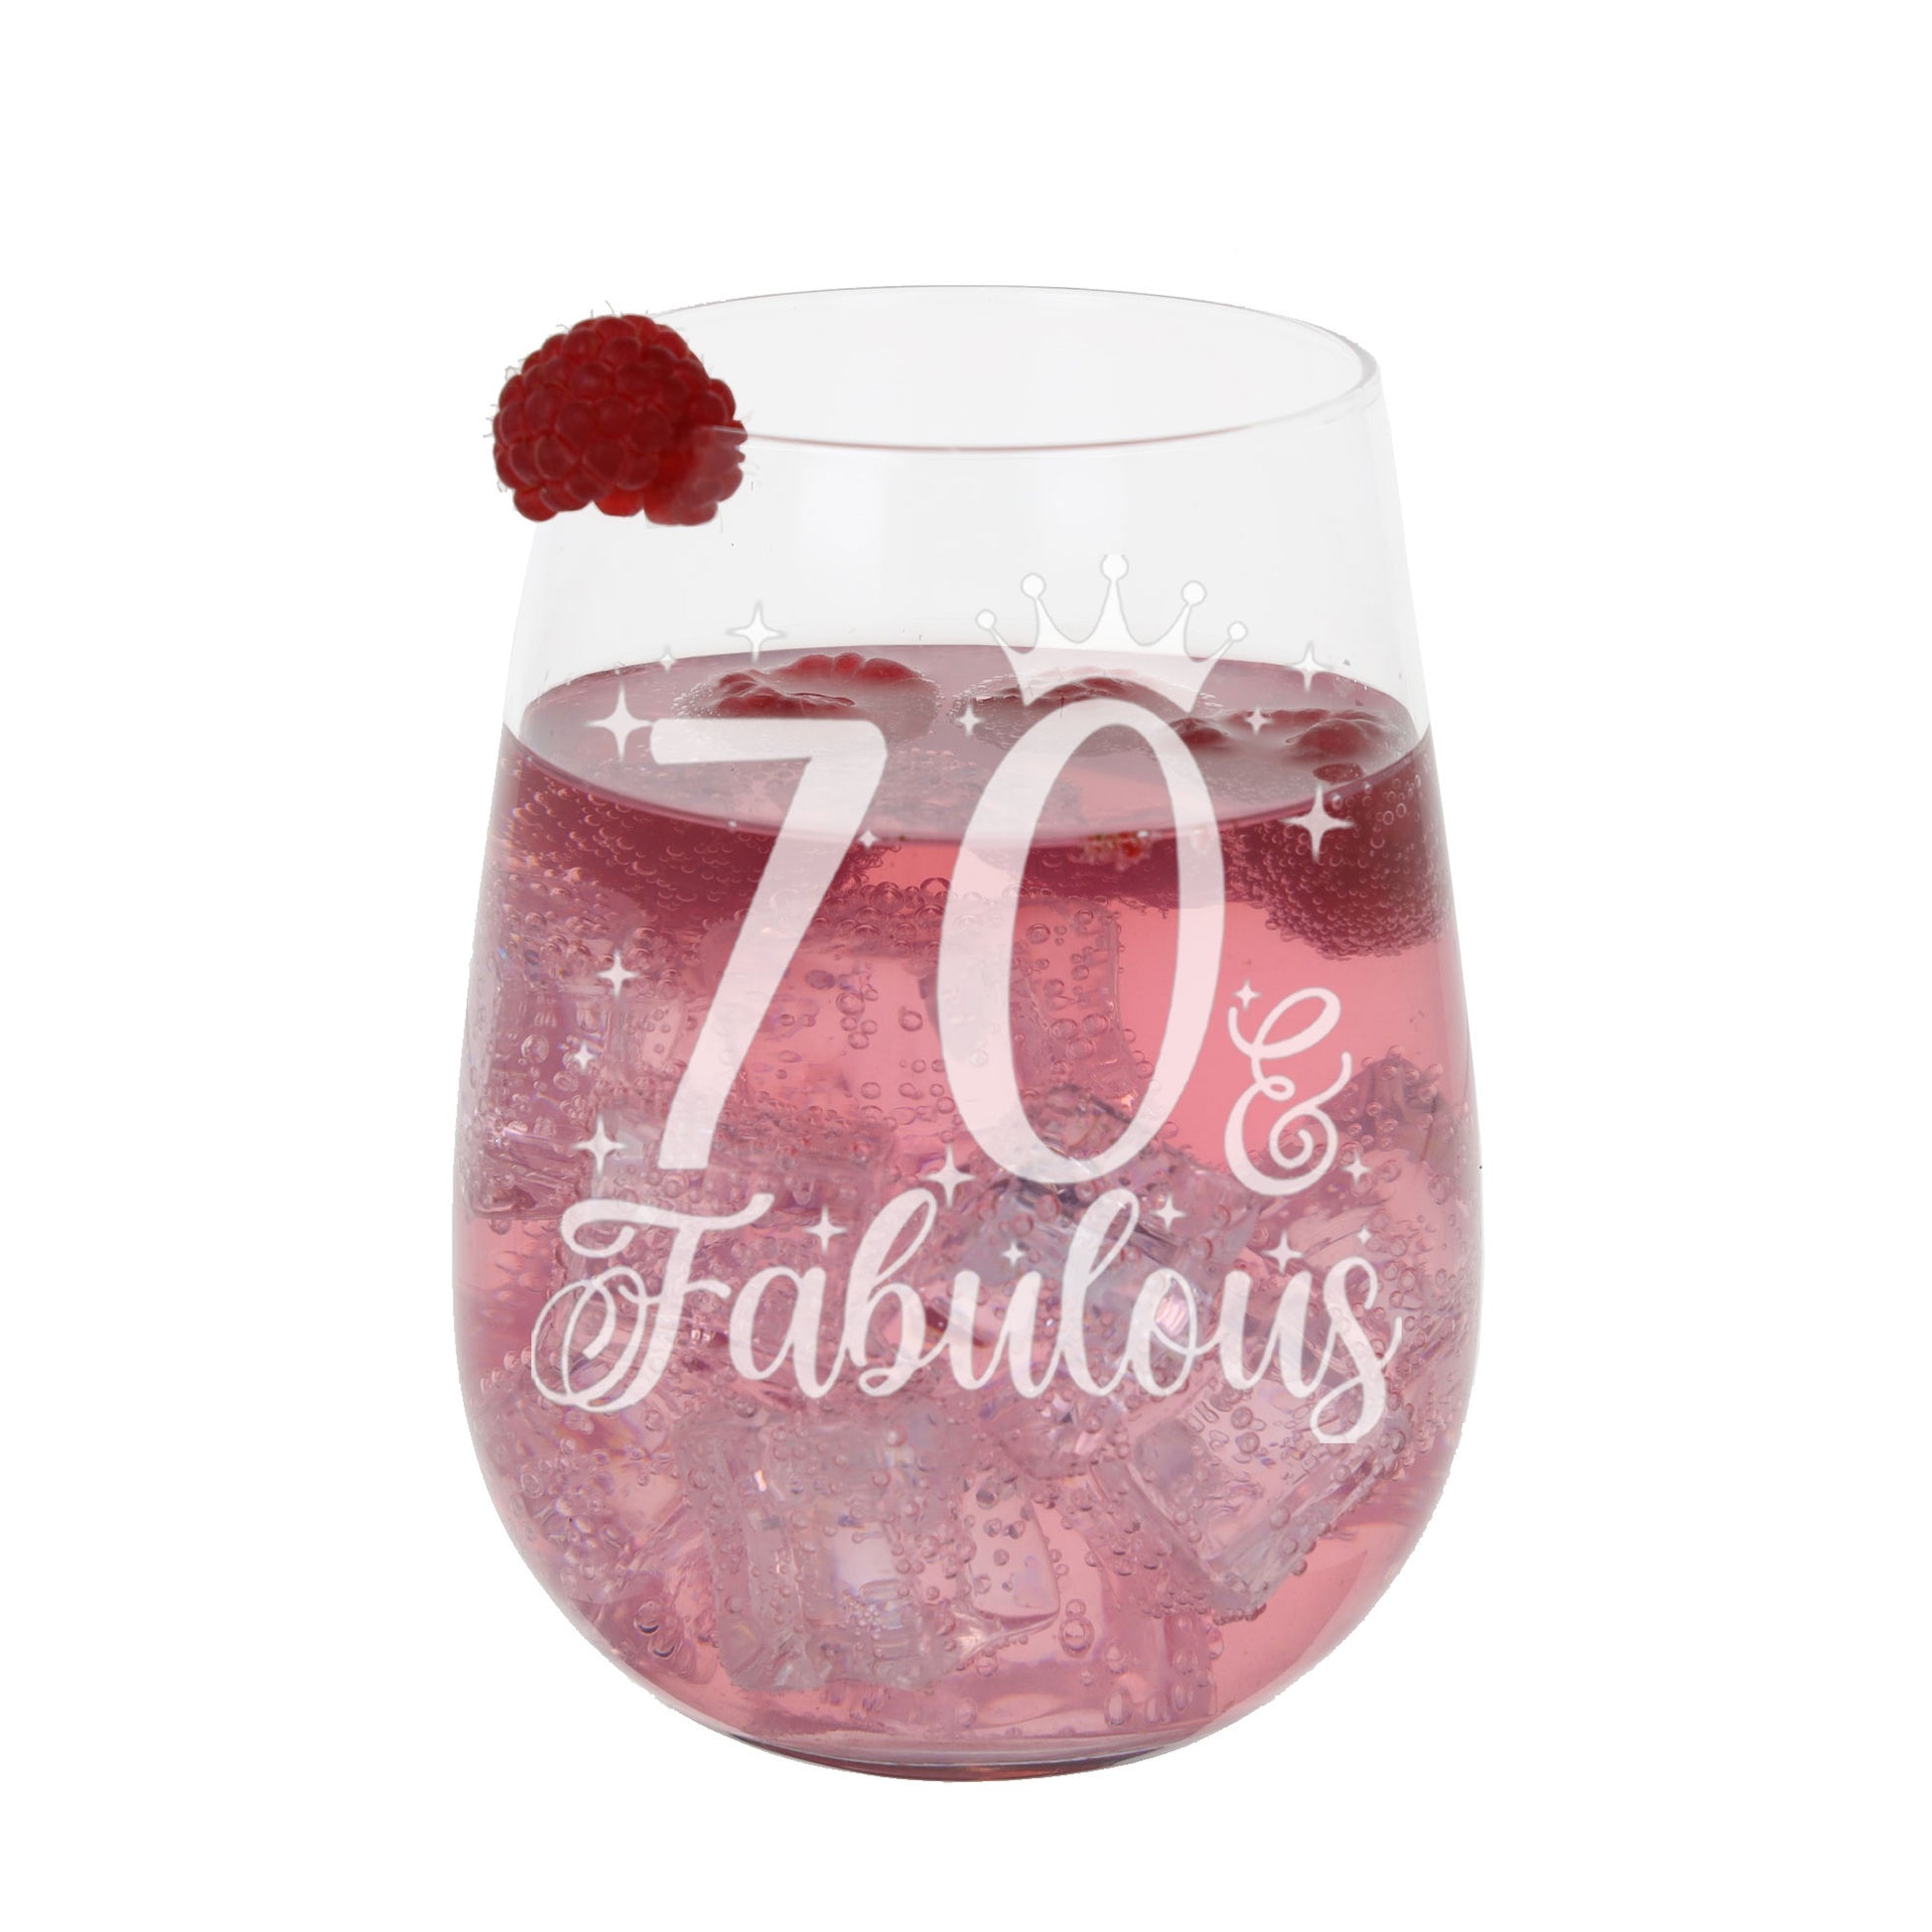 70 & Fabulous Engraved Stemless Gin Glass and/or Coaster Set  - Always Looking Good -   